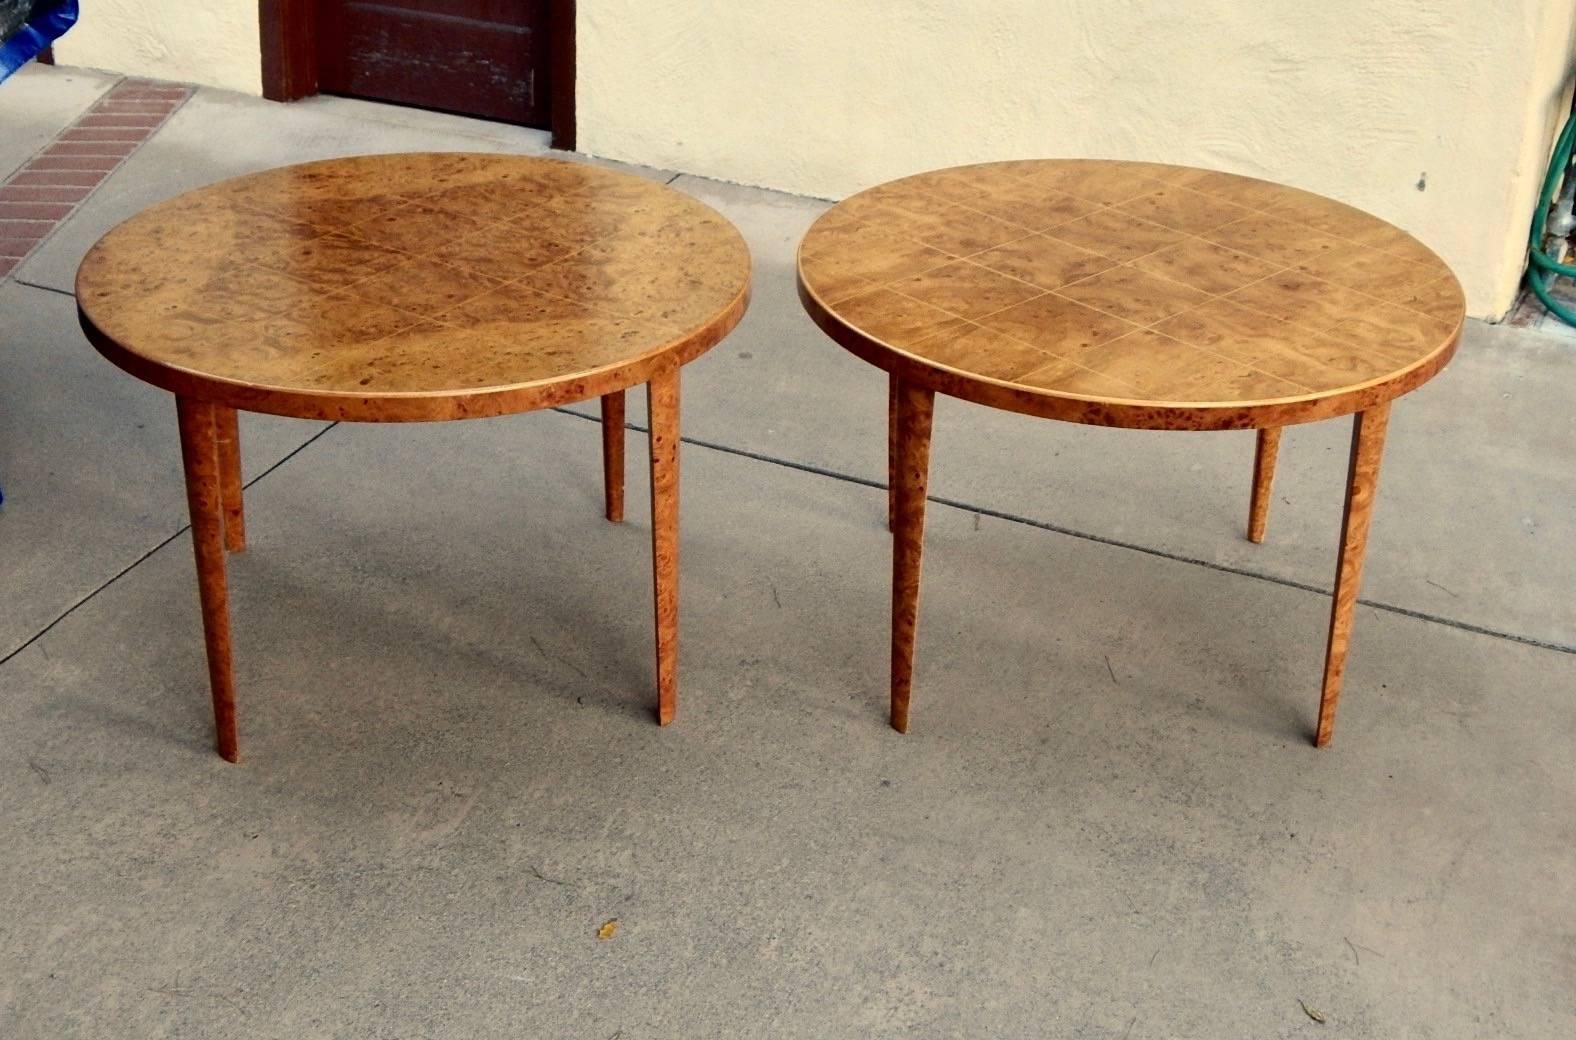 Swedish Pair of Side Tables with Grid Pattern Inlay-Nordiskakompaniet, Stockholm, 1947 For Sale